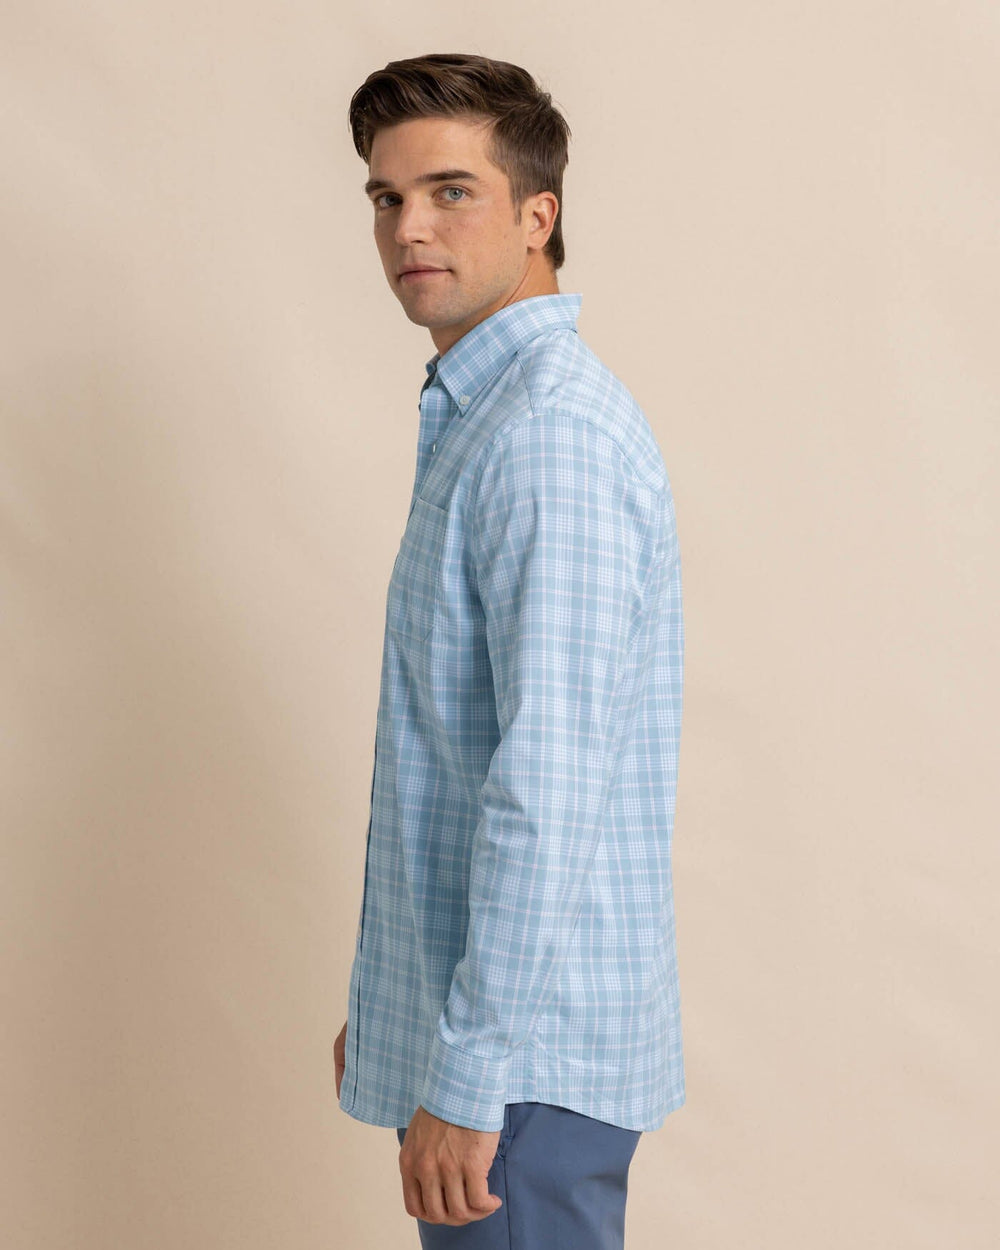 The front view of the Southern Tide Intercoastal Primrose Plaid Long Sleeve Sport Shirt by Southern Tide - Subdued Blue